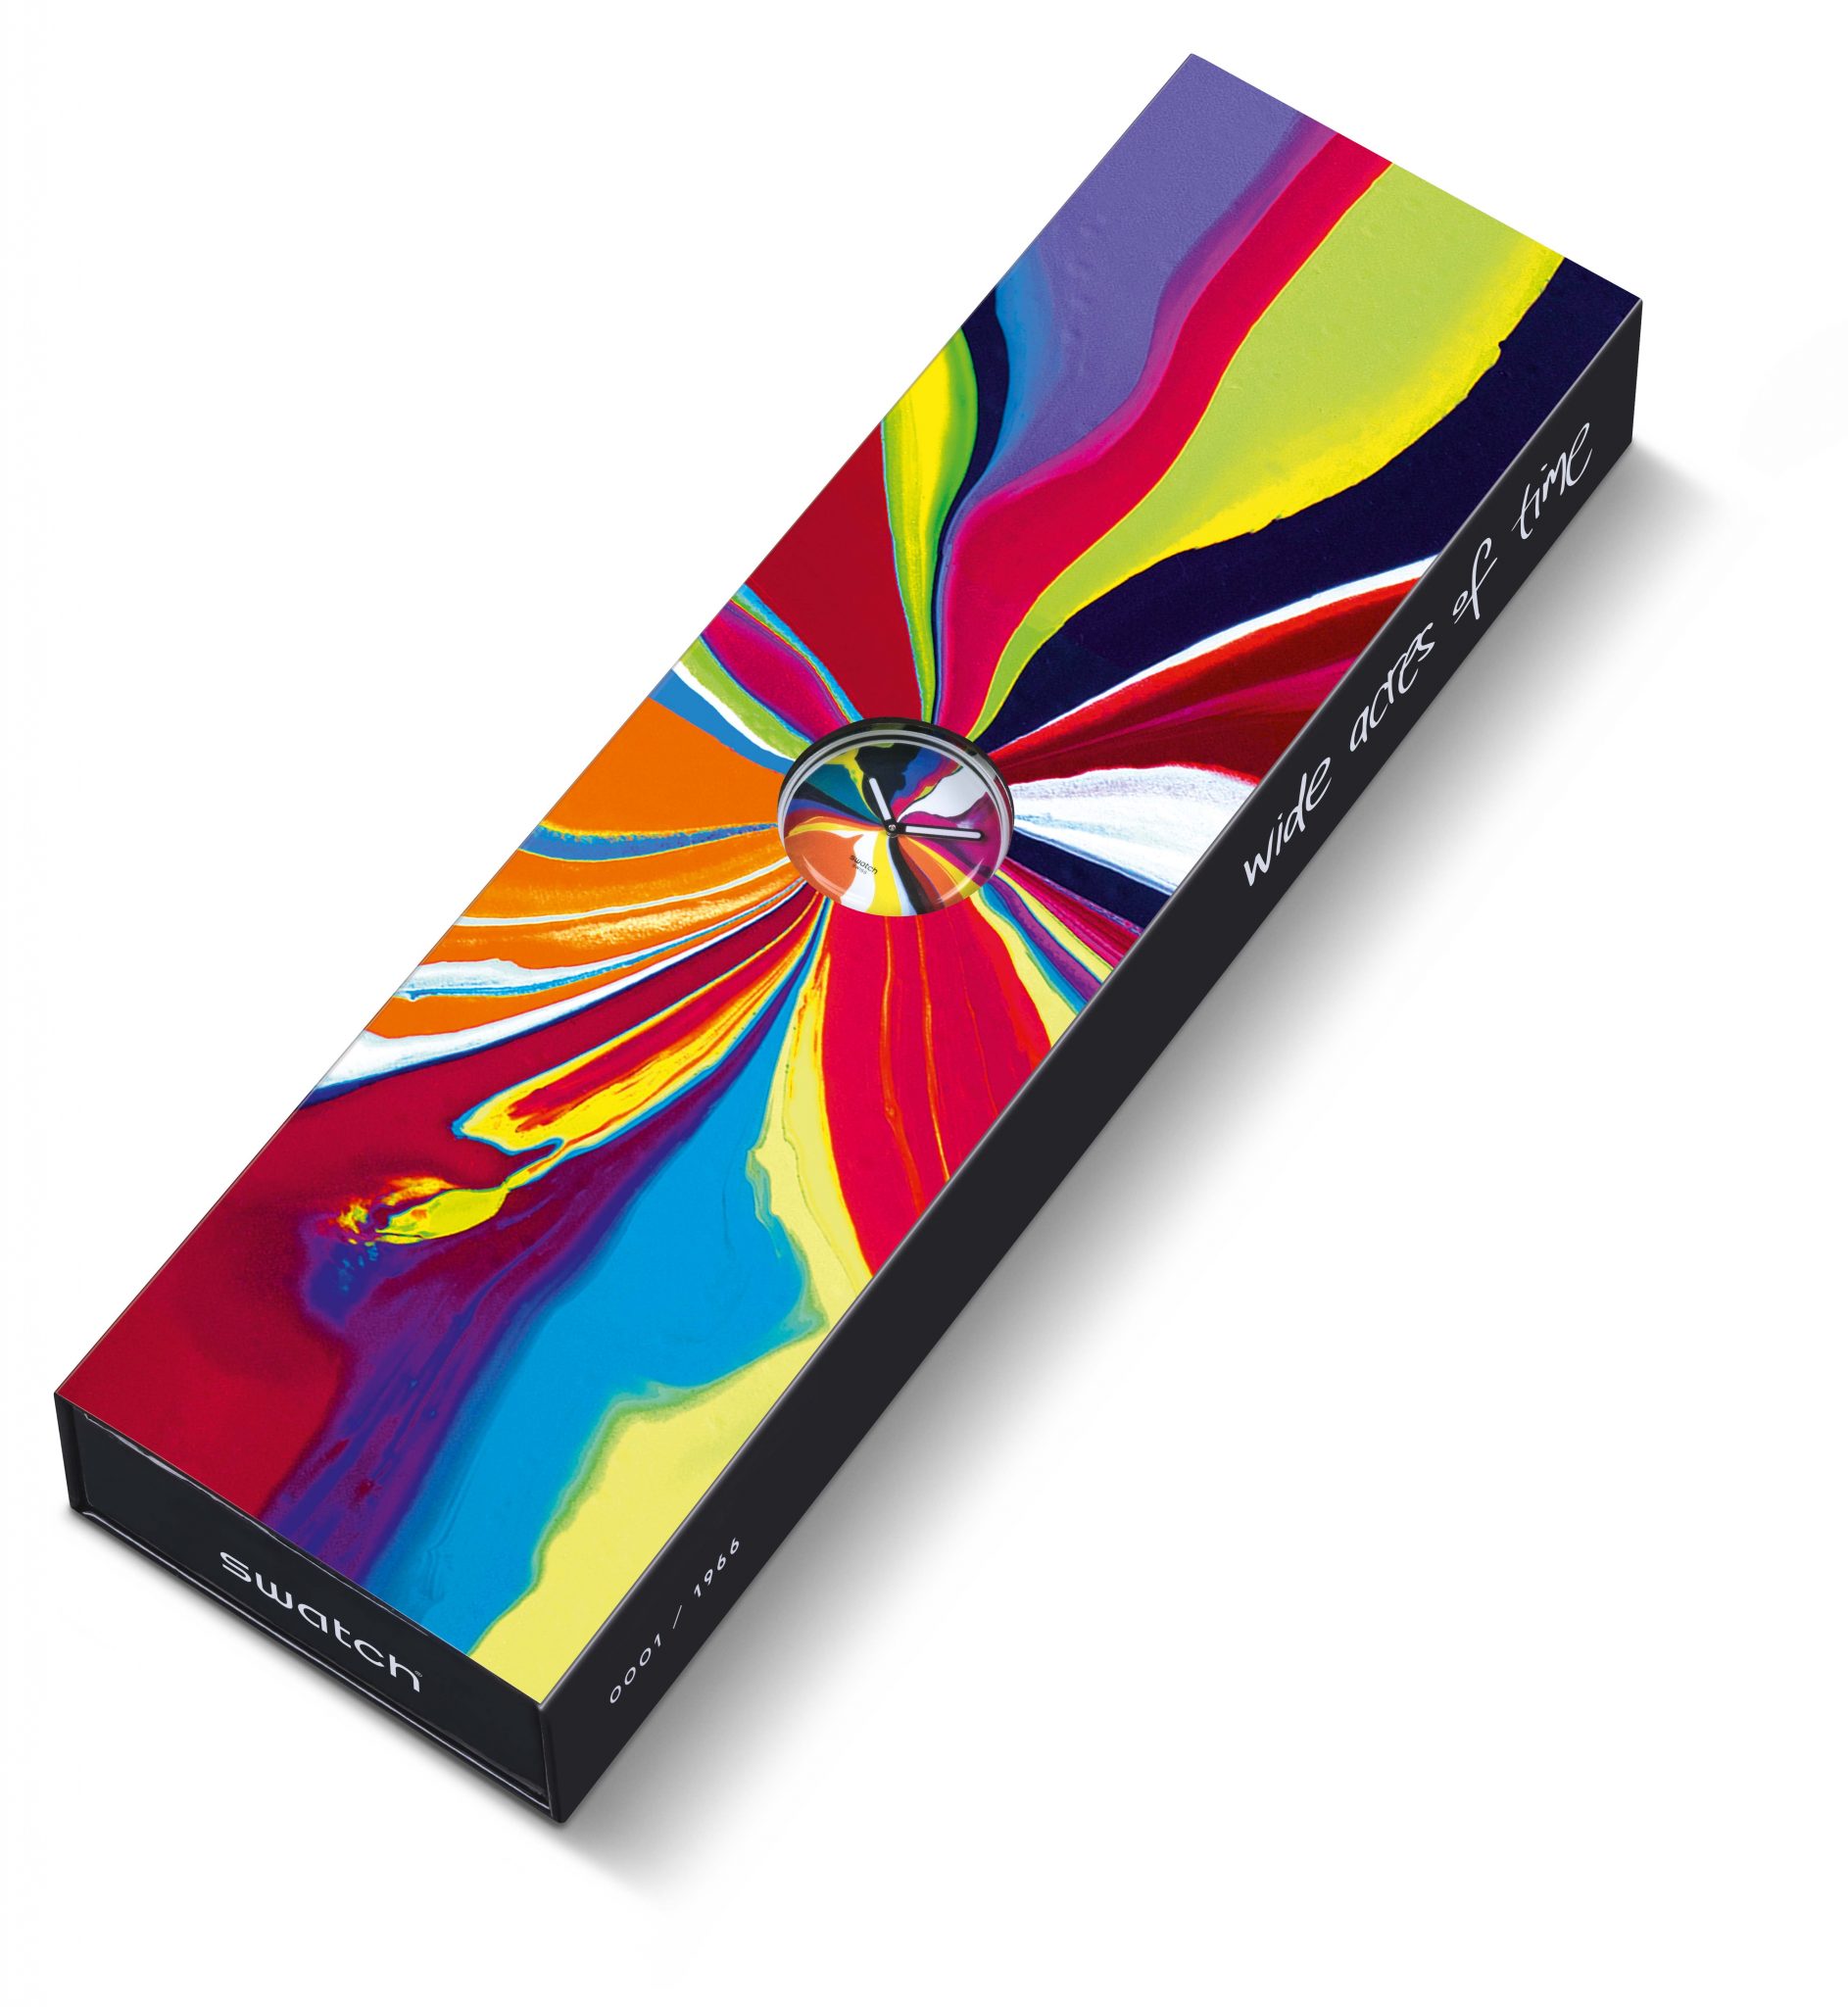 WIDE ACRES OF TIME, designed by Ian Davenport, Swatch Art Collection ...